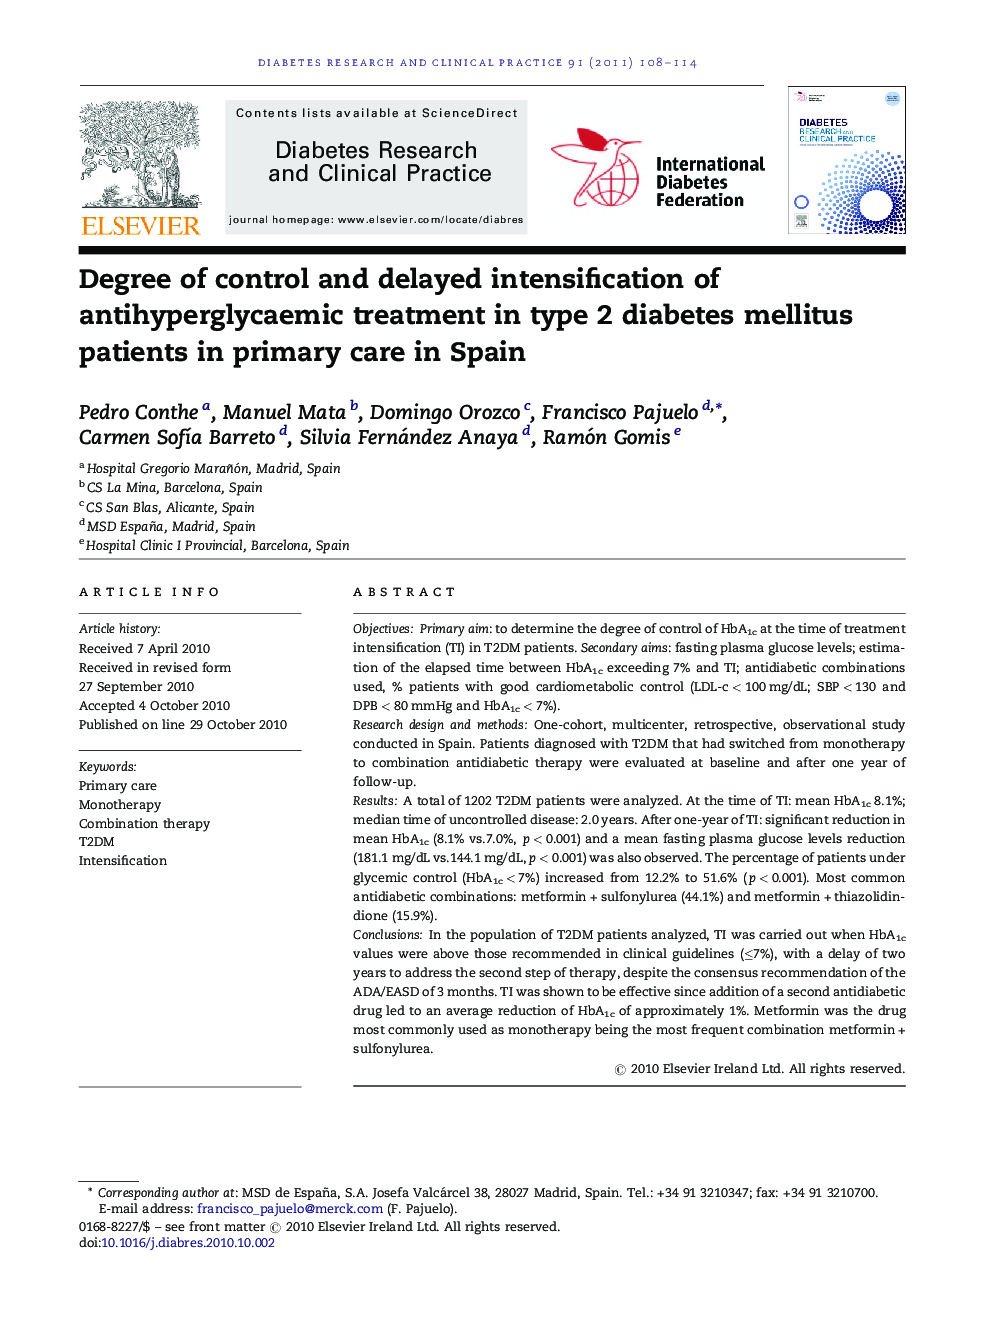 Degree of control and delayed intensification of antihyperglycaemic treatment in type 2 diabetes mellitus patients in primary care in Spain